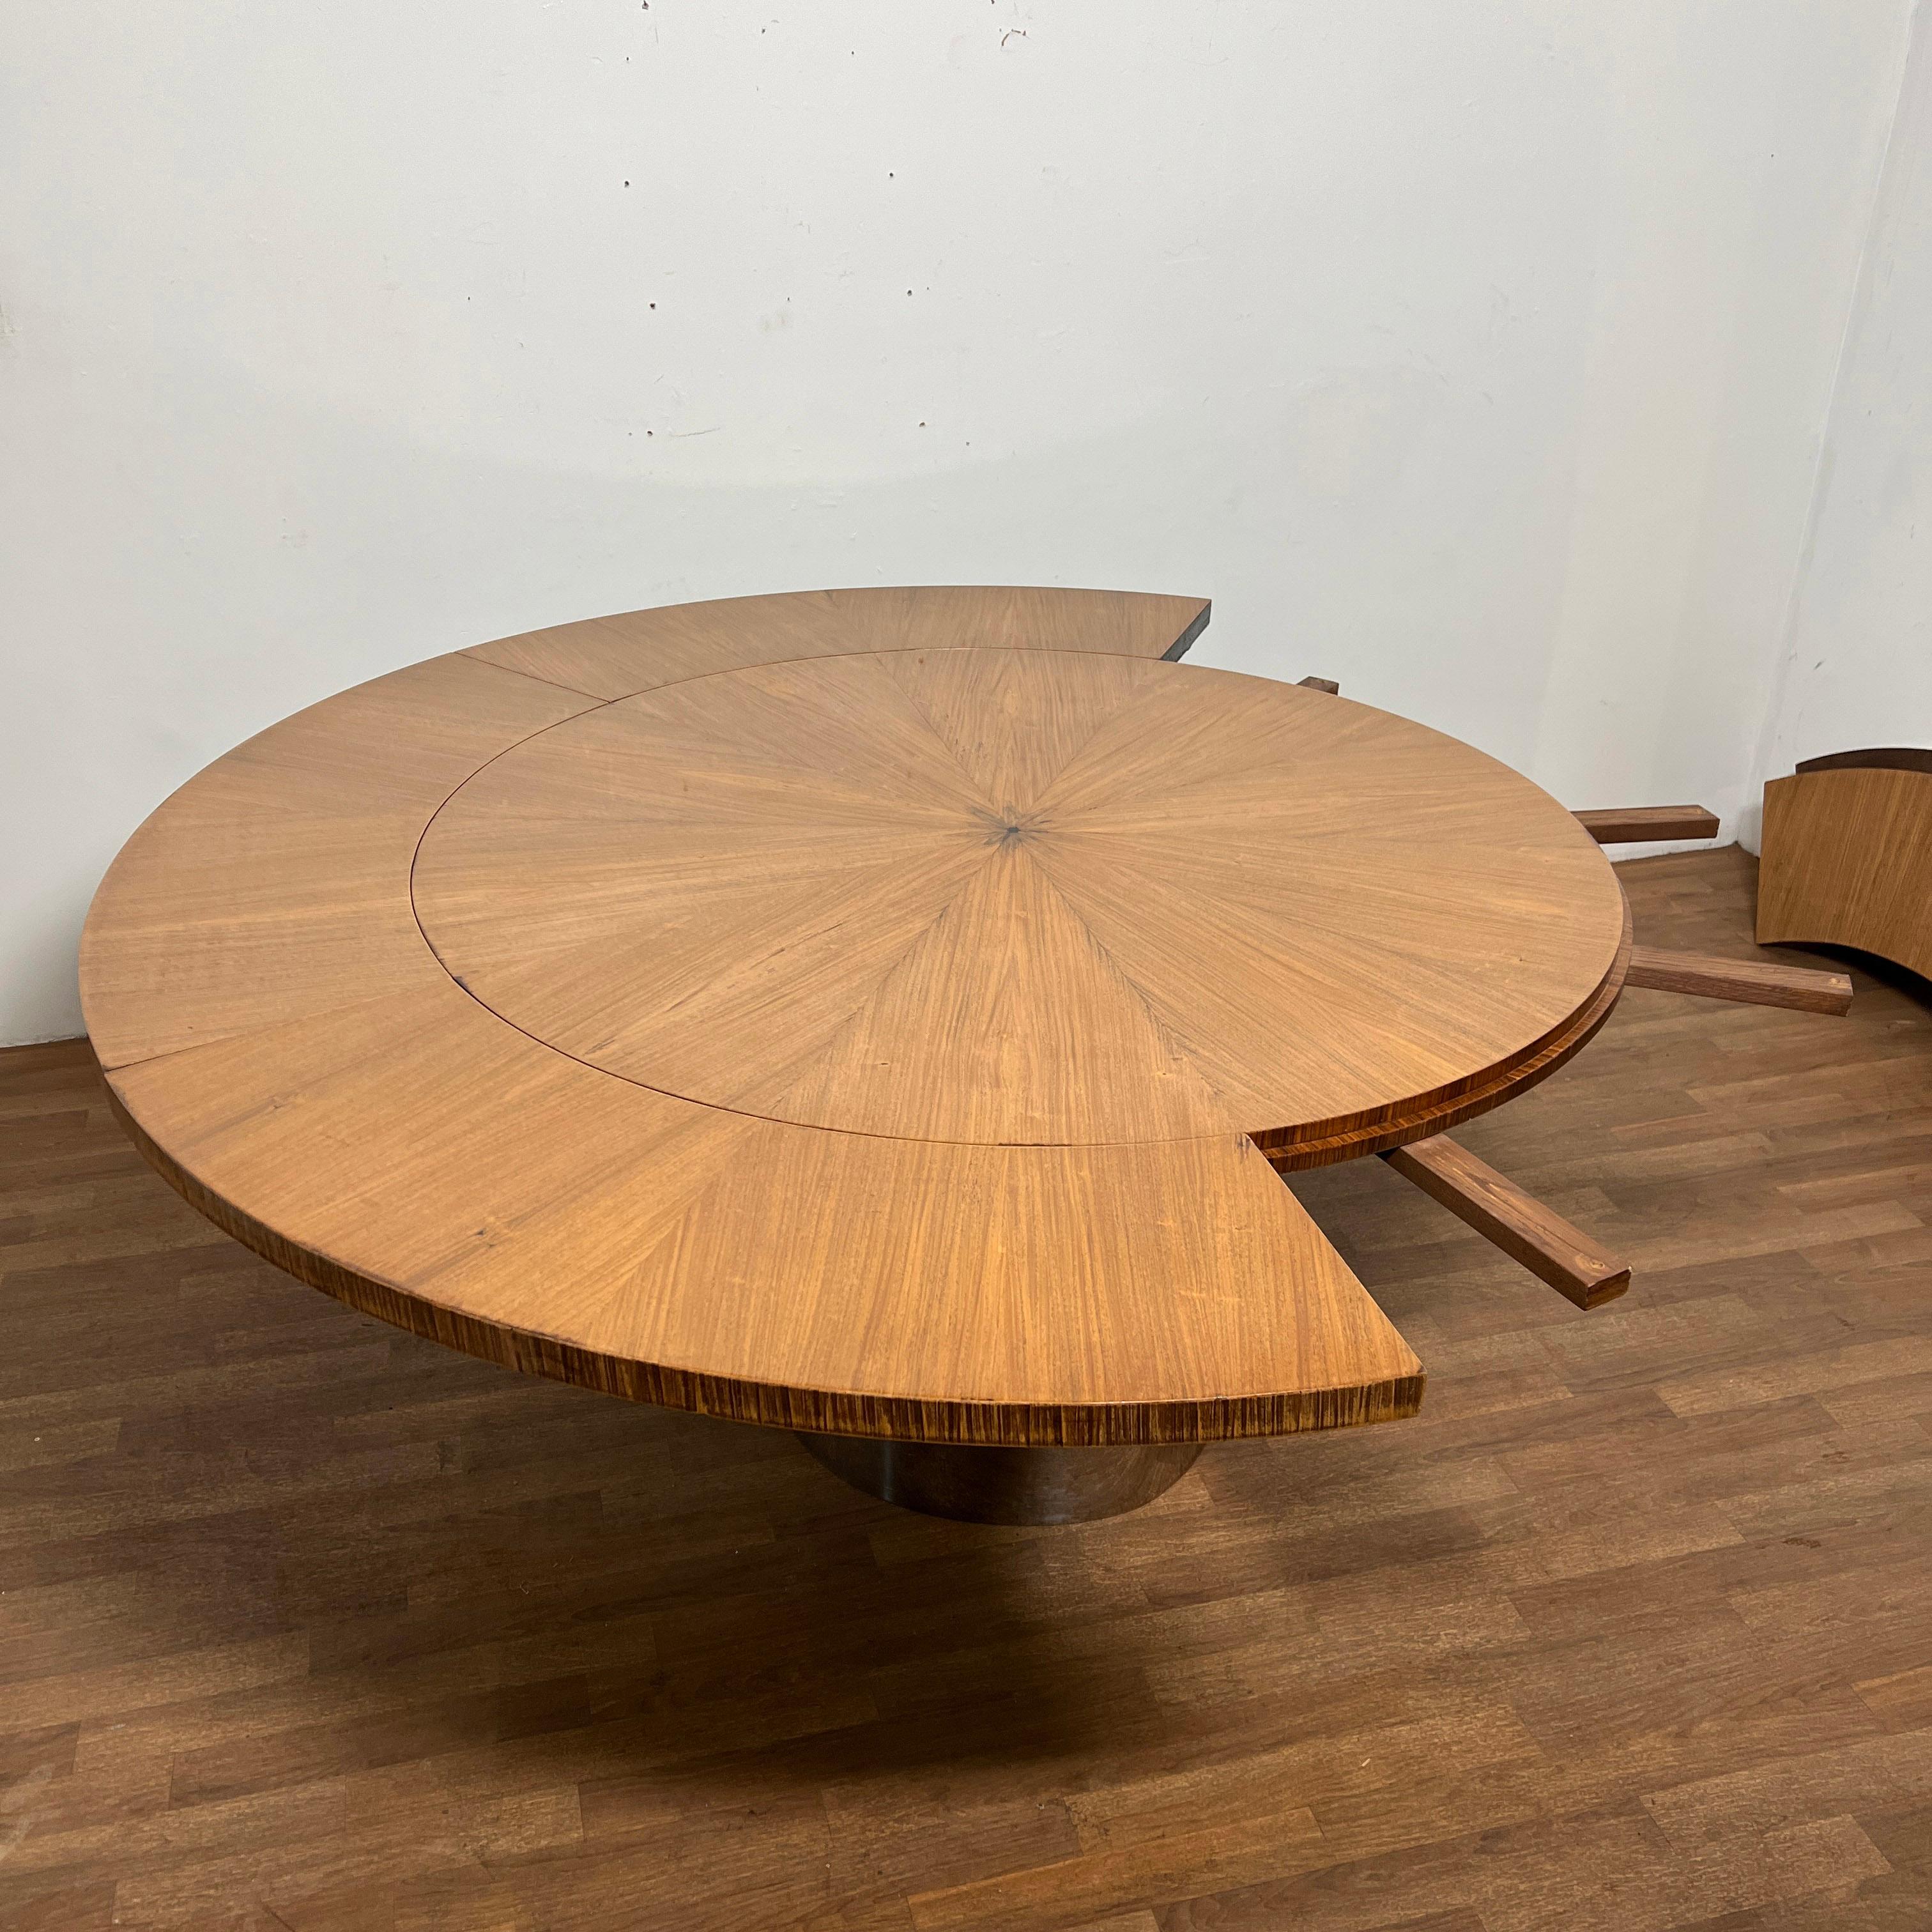 Steel Radial Mahogany Expandable Dining Table in Manner of Karl Springer, Ca. 1970s